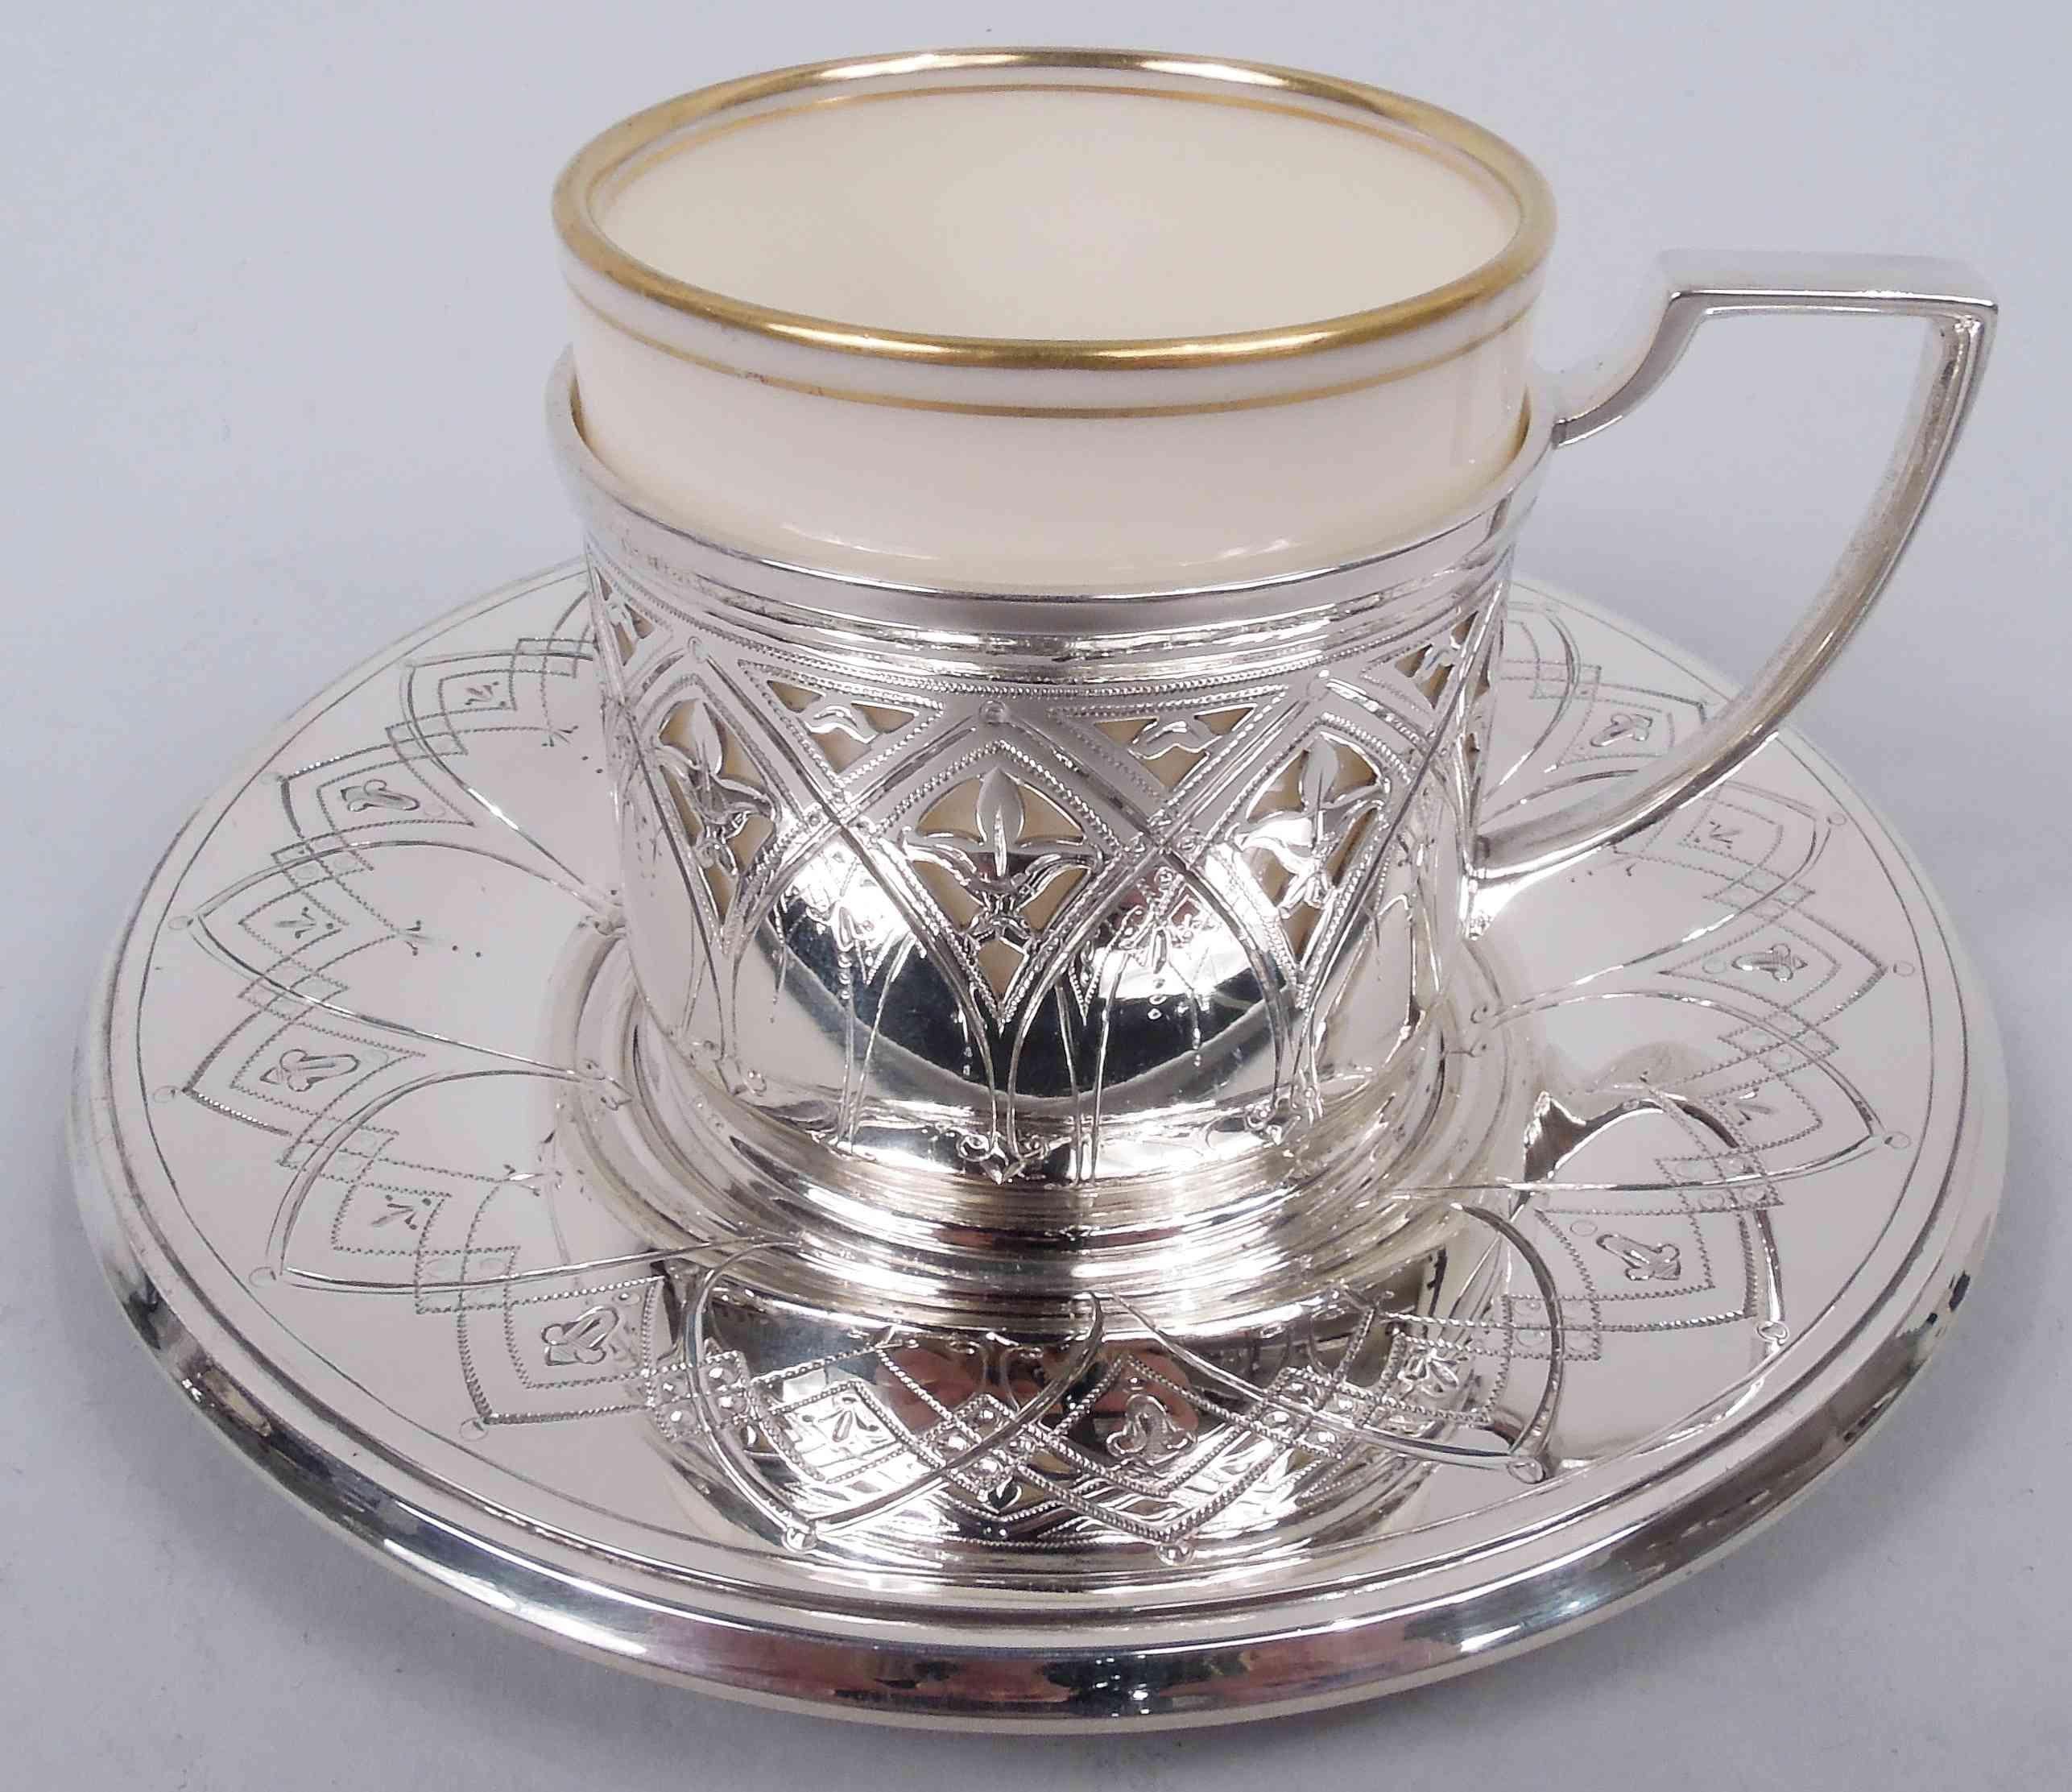 Set of 12 Modern Gothic sterling silver demitasse holders. Made by Tiffany & Co. in New York, 1927. Each holder: Drum-form holder with stepped rims. Each saucer: Deep plain well and canted rim. Engraved interlaced arcade with stylized pendant